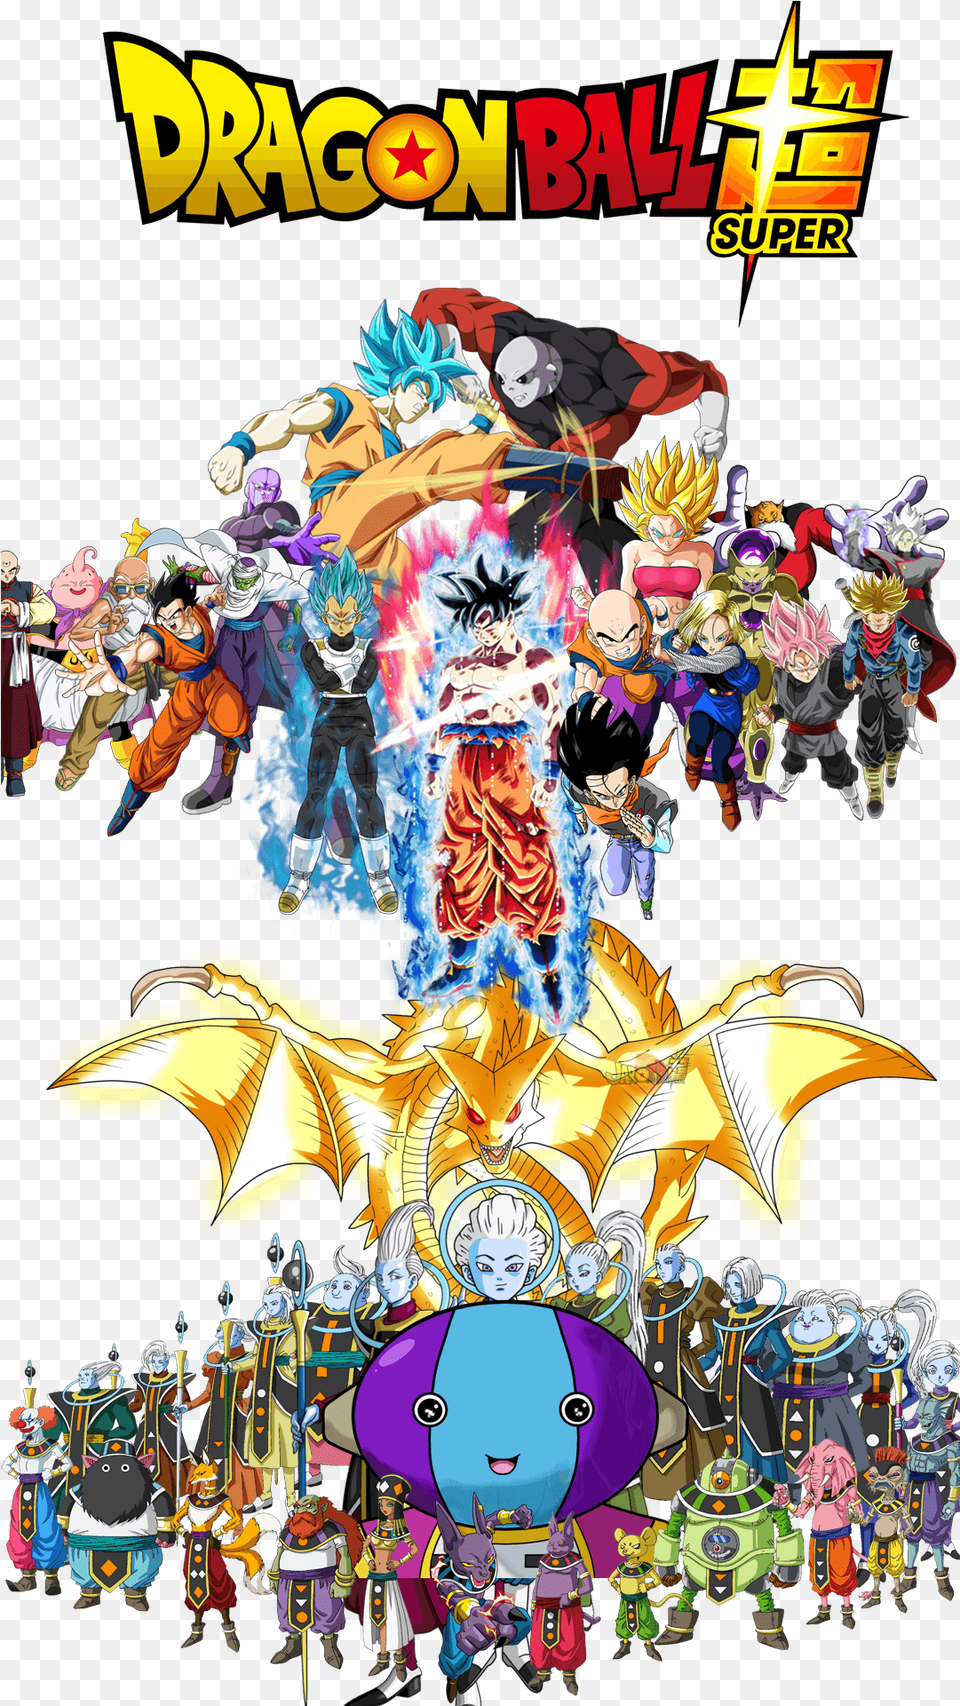 Download Dragon Ball Z Iphone Wallpapers Top Dragon Ball Wallpaper Iphone, Publication, Book, Carnival, Comics Png Image